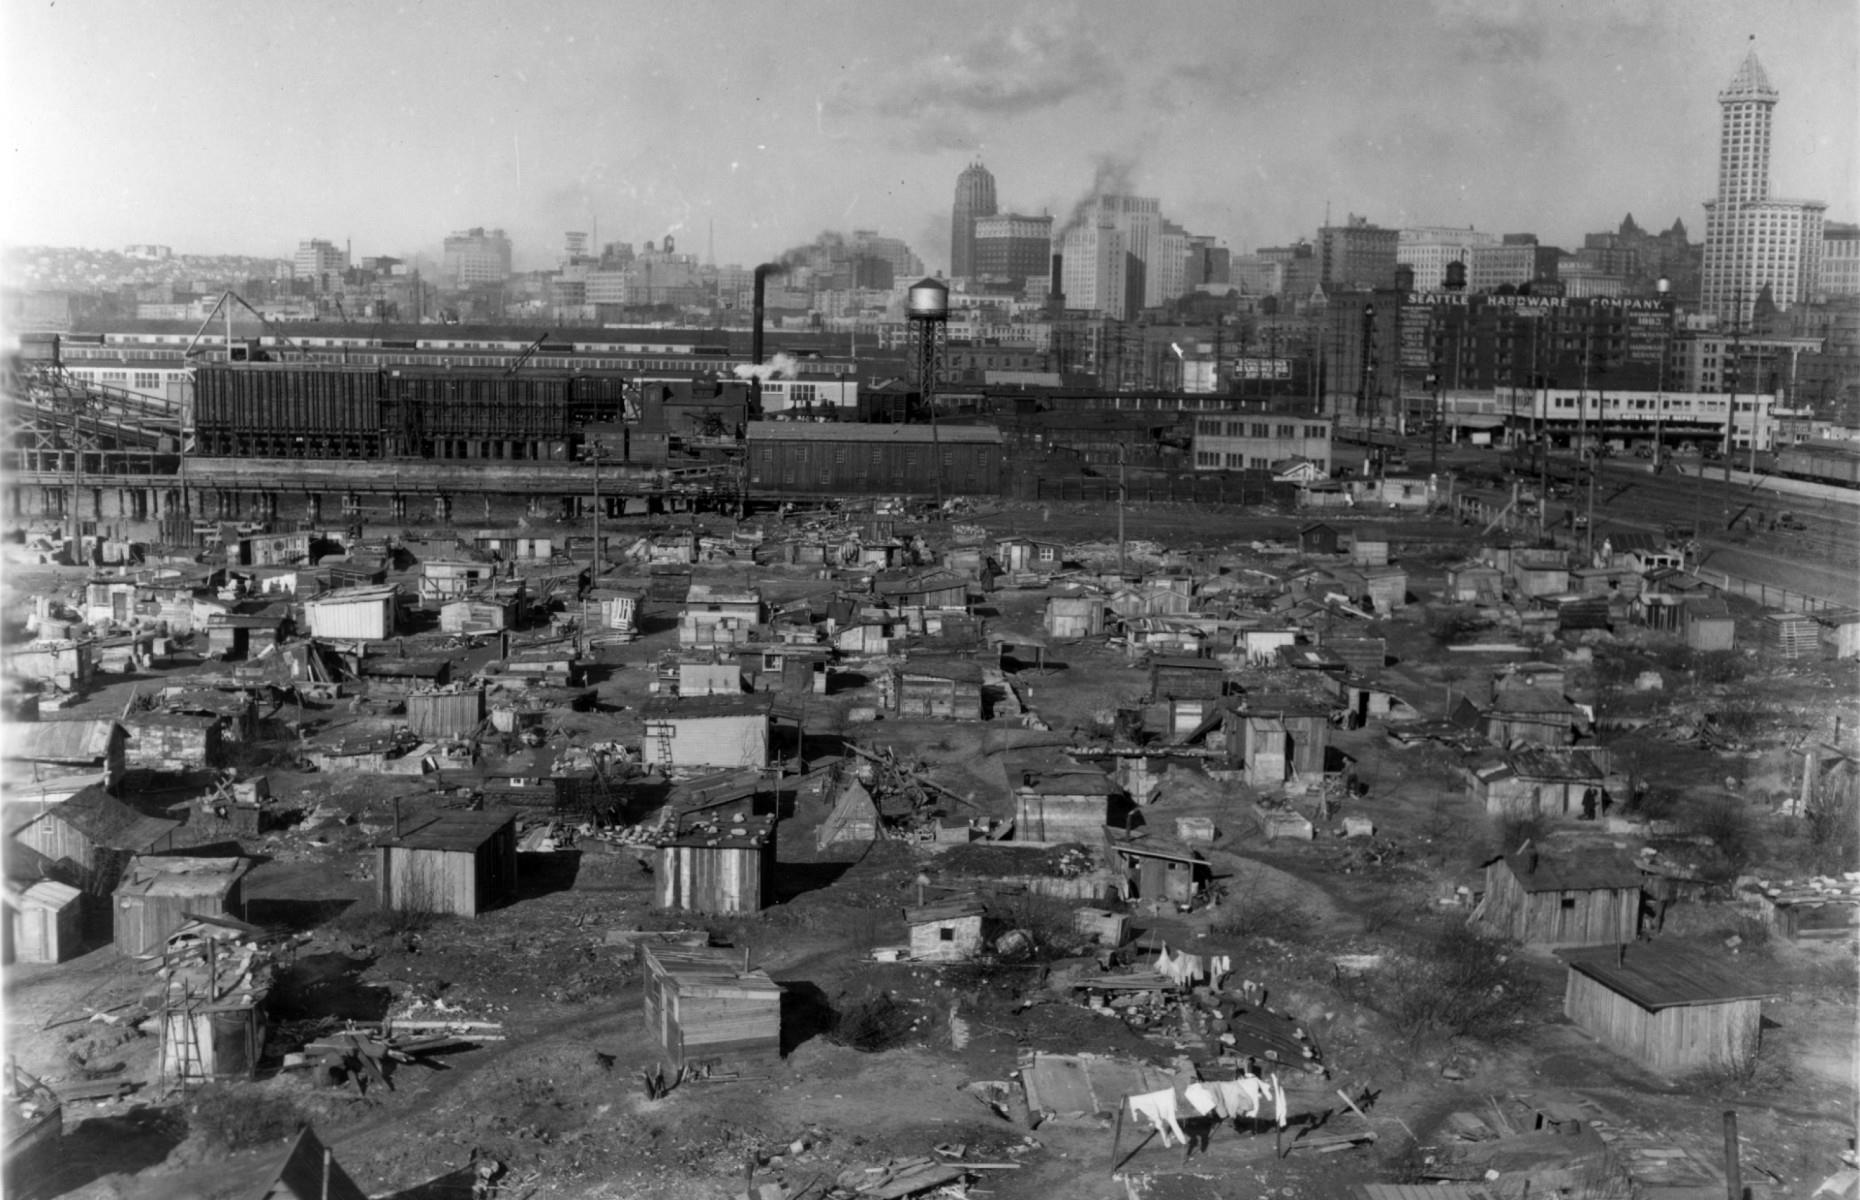 <p>The Bonus Army camp wasn’t the only temporary settlement that arose during the Depression. Hundreds of shantytowns cropped up on the outskirts of cities as unemployed workers were evicted from their homes and built shelters out of whatever they could lay their hands on.</p>  <p>Named Hoovervilles after the increasingly unpopular President Hoover, the shantytowns in St Louis and Seattle (pictured here) were particularly large, with thousands of inhabitants.</p>